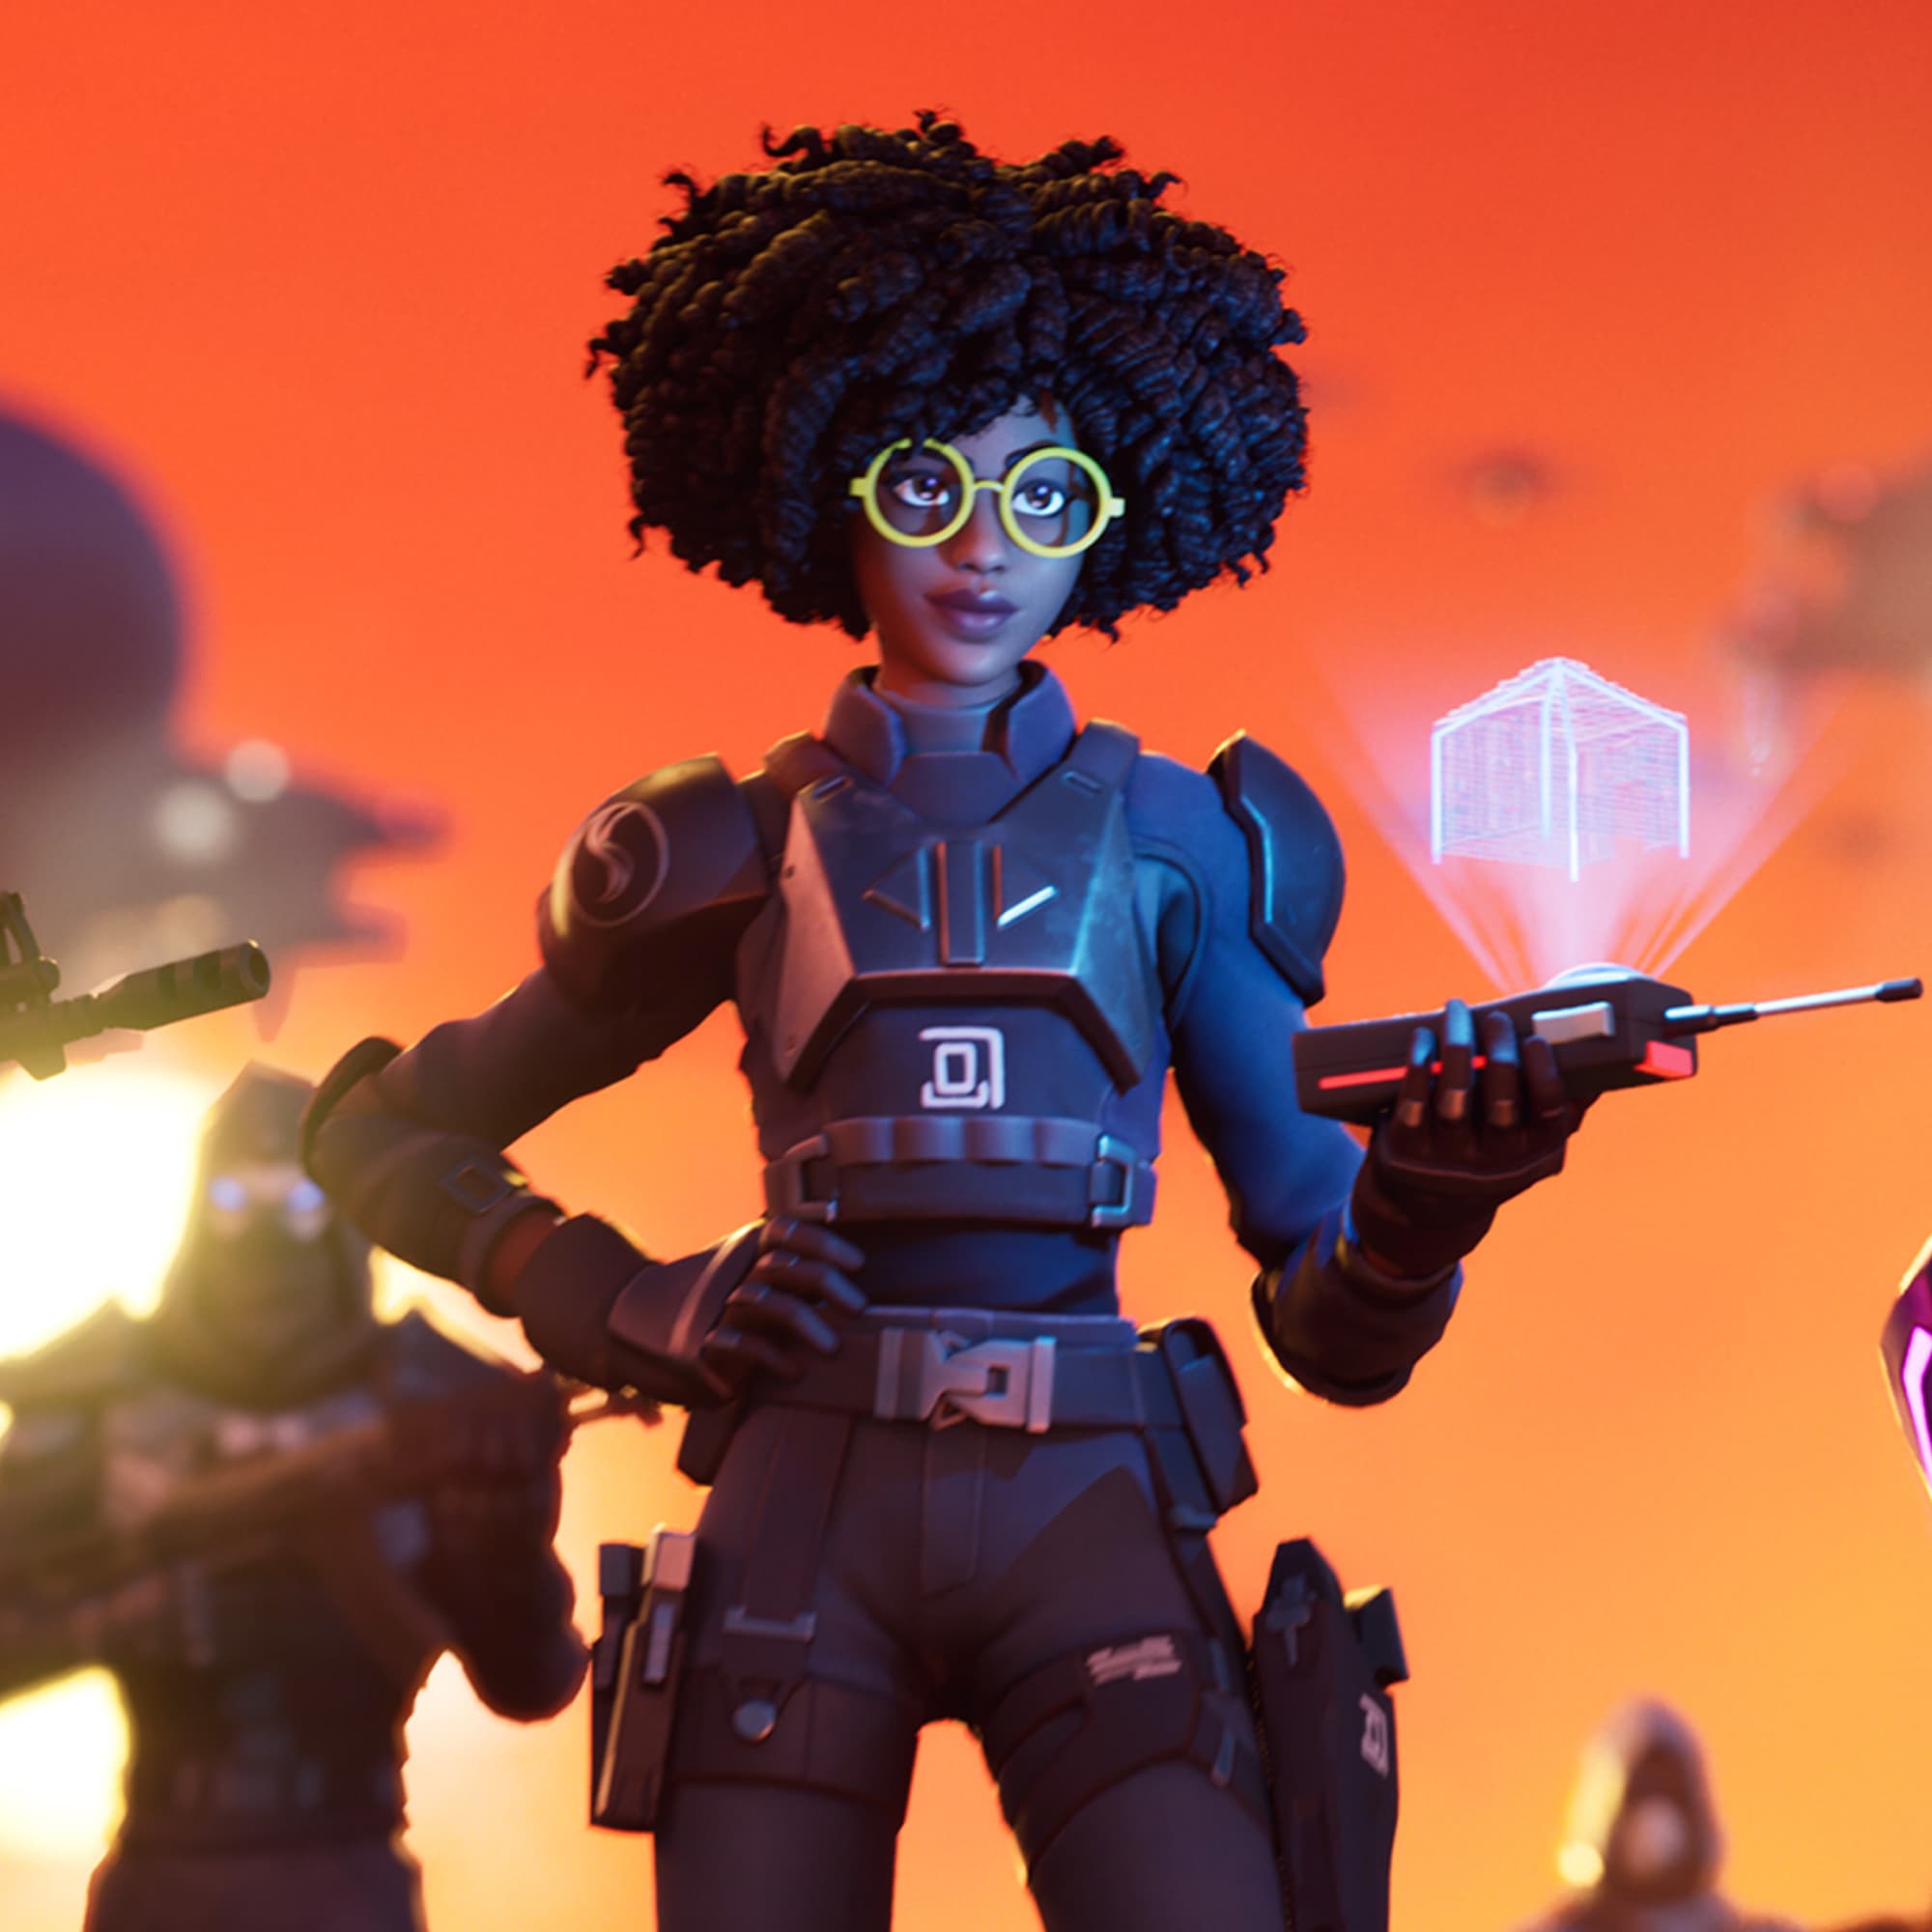 A character in Fortnite battle royale wearing armour and glasses with a glowing hand device.